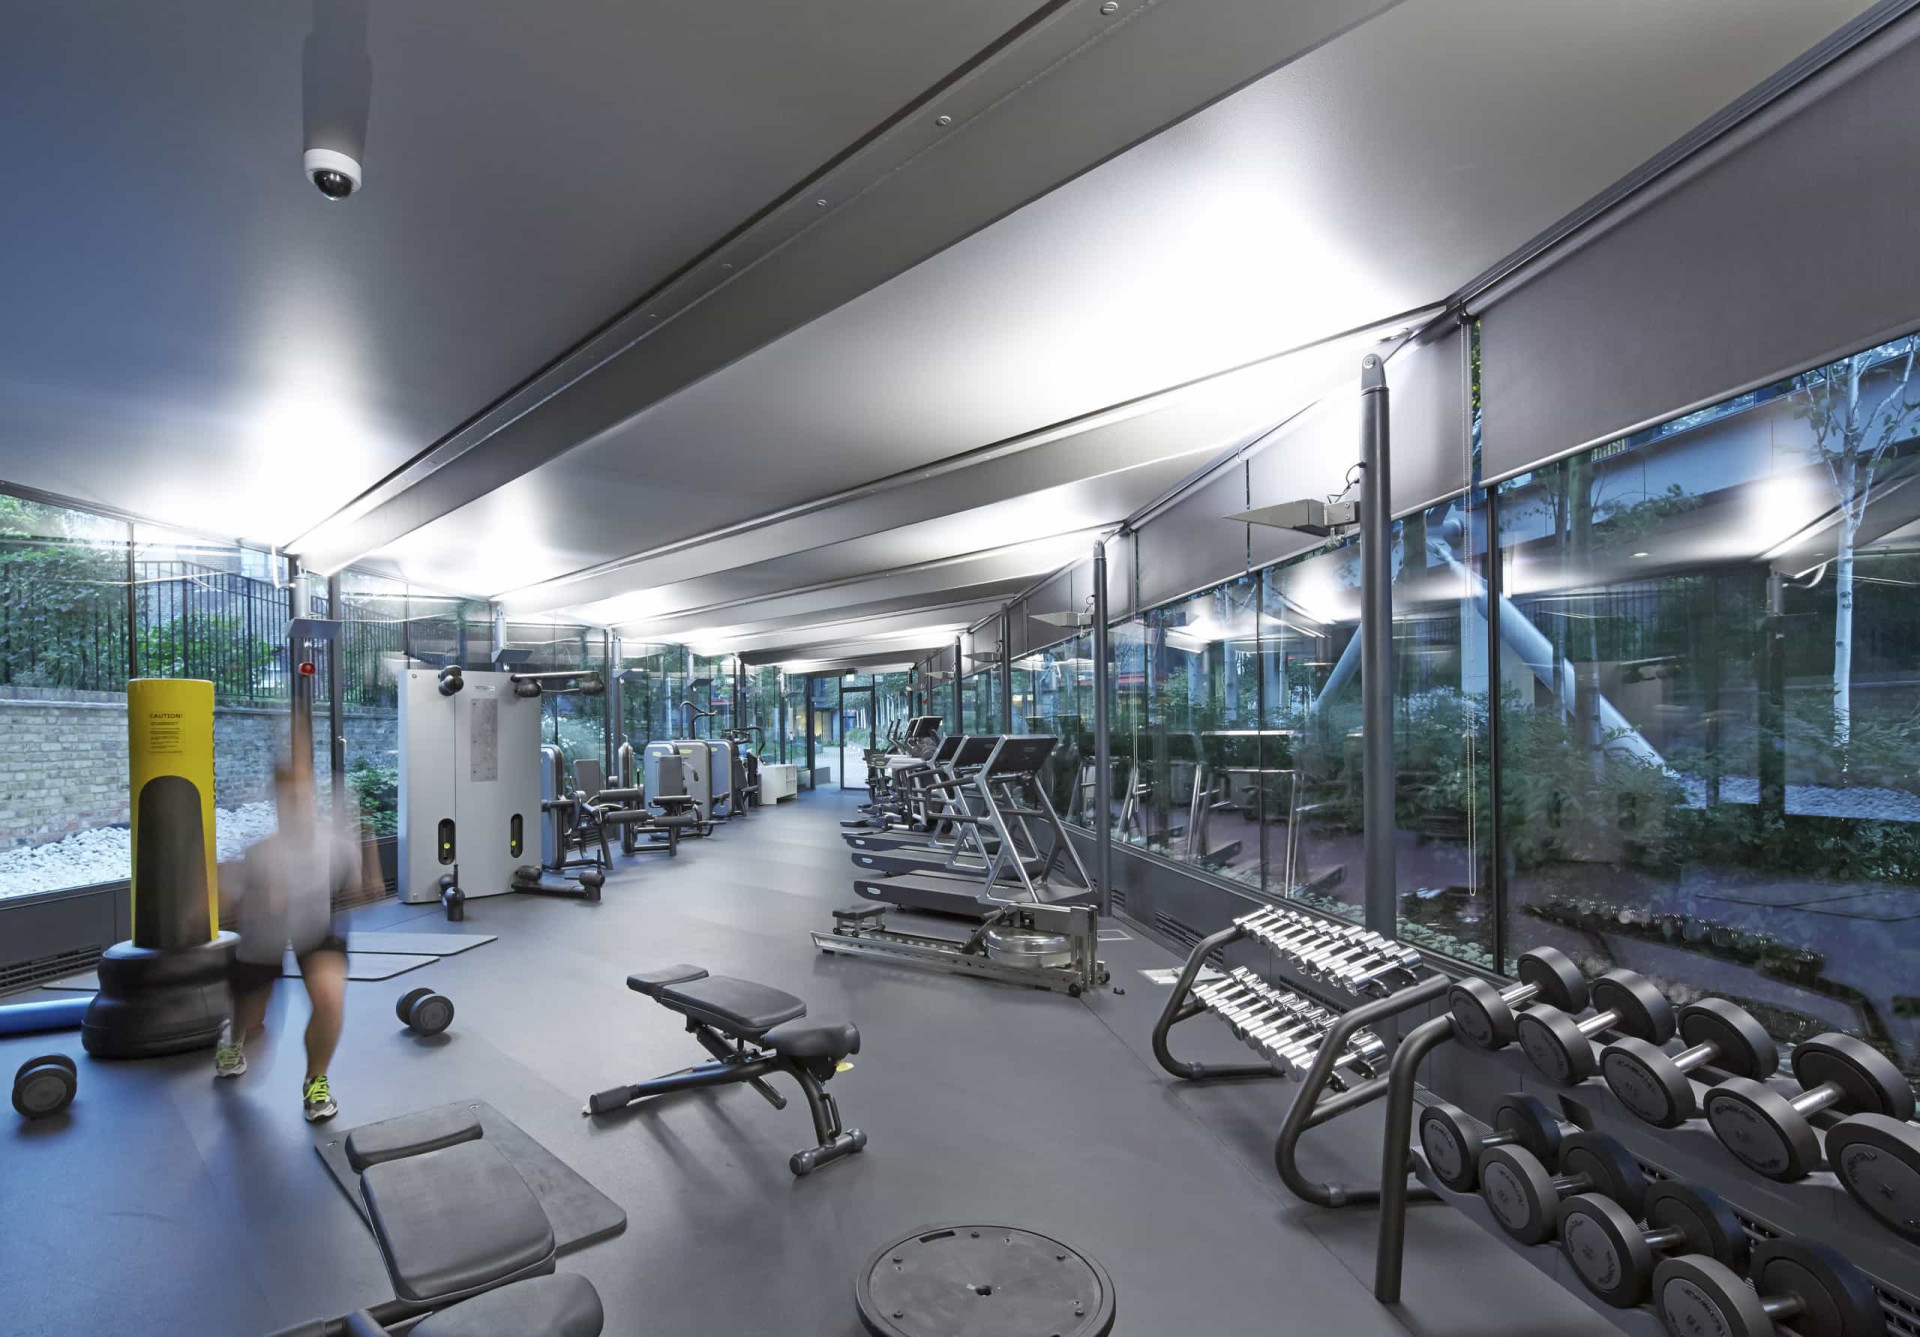 <p>While niche spaces continue to exist, many modern gyms mix a wide range of disciplines. Members can lift weights, run on a treadmill, or do martial arts, among many other things.</p> <p>Sources: (The University of New Mexico) (Les Mills) (ClubReady)</p>